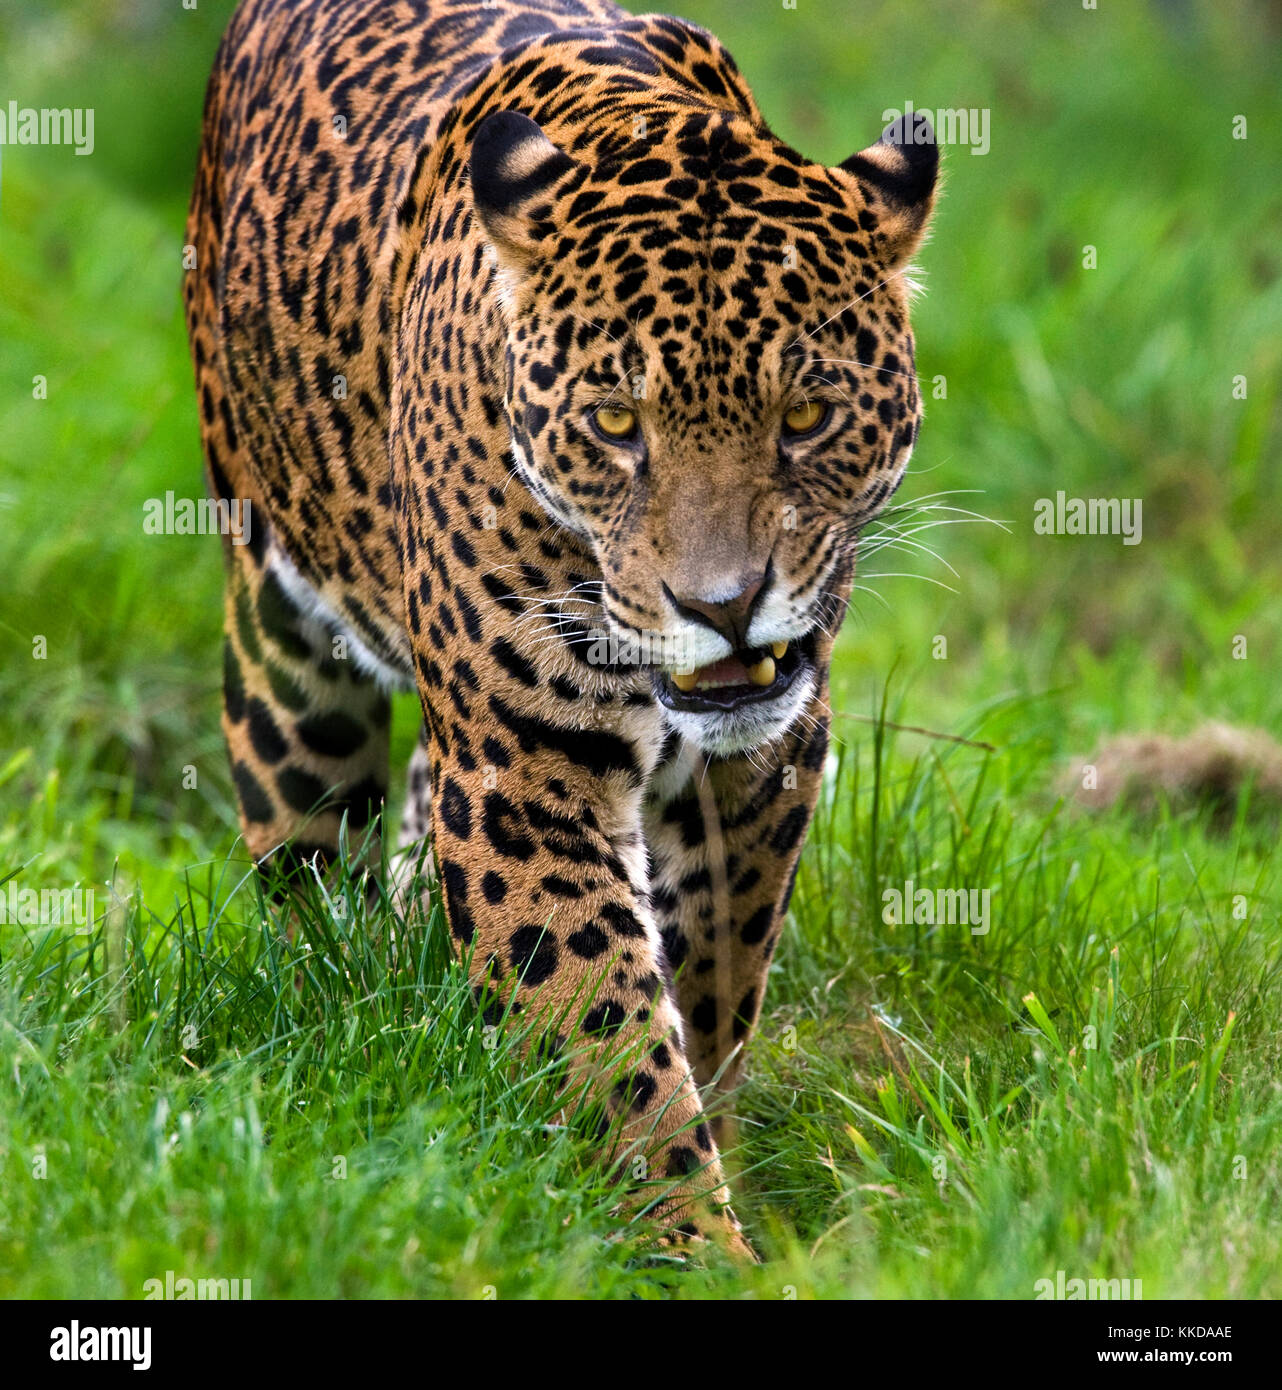 Jaguar (Panthera onca) - a mammal of the Felidae family and one of four â€˜big catsâ€™ in the Panthera genus, along with the tiger, lion, and leopard. Stock Photo